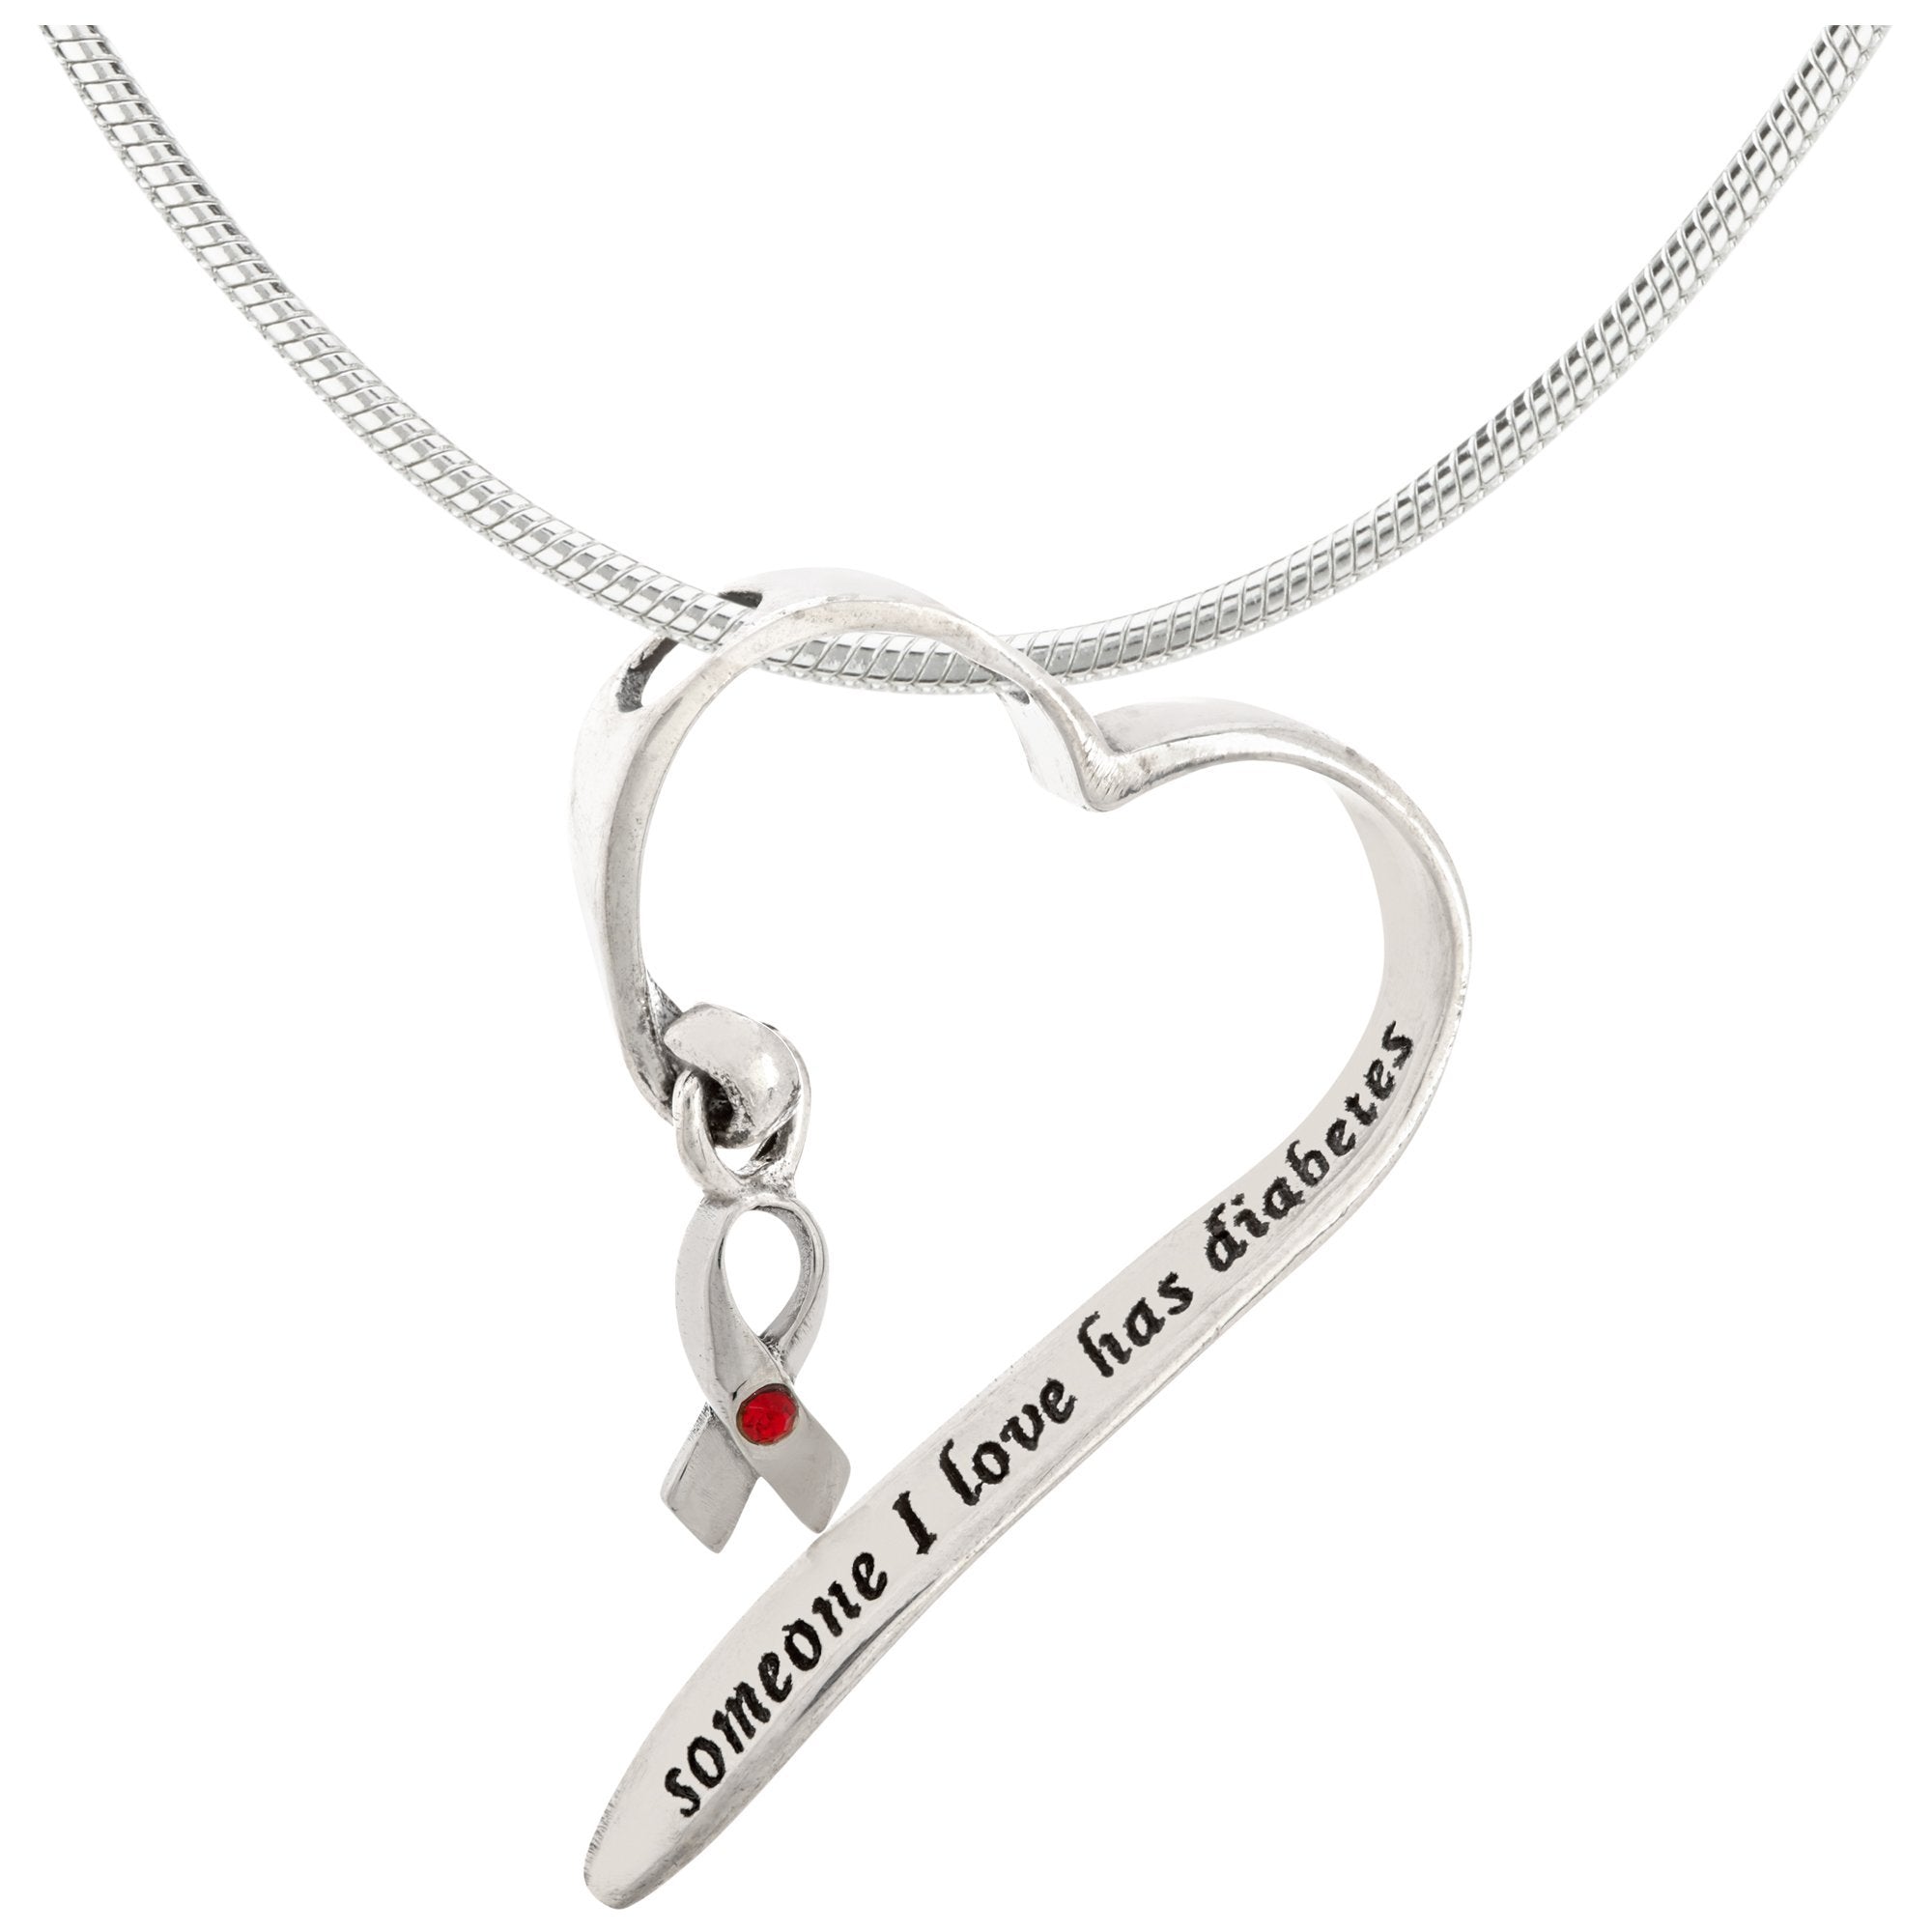 Someone I Love Has Diabetes Sterling Heart Necklace - With Sterling Cable Chain